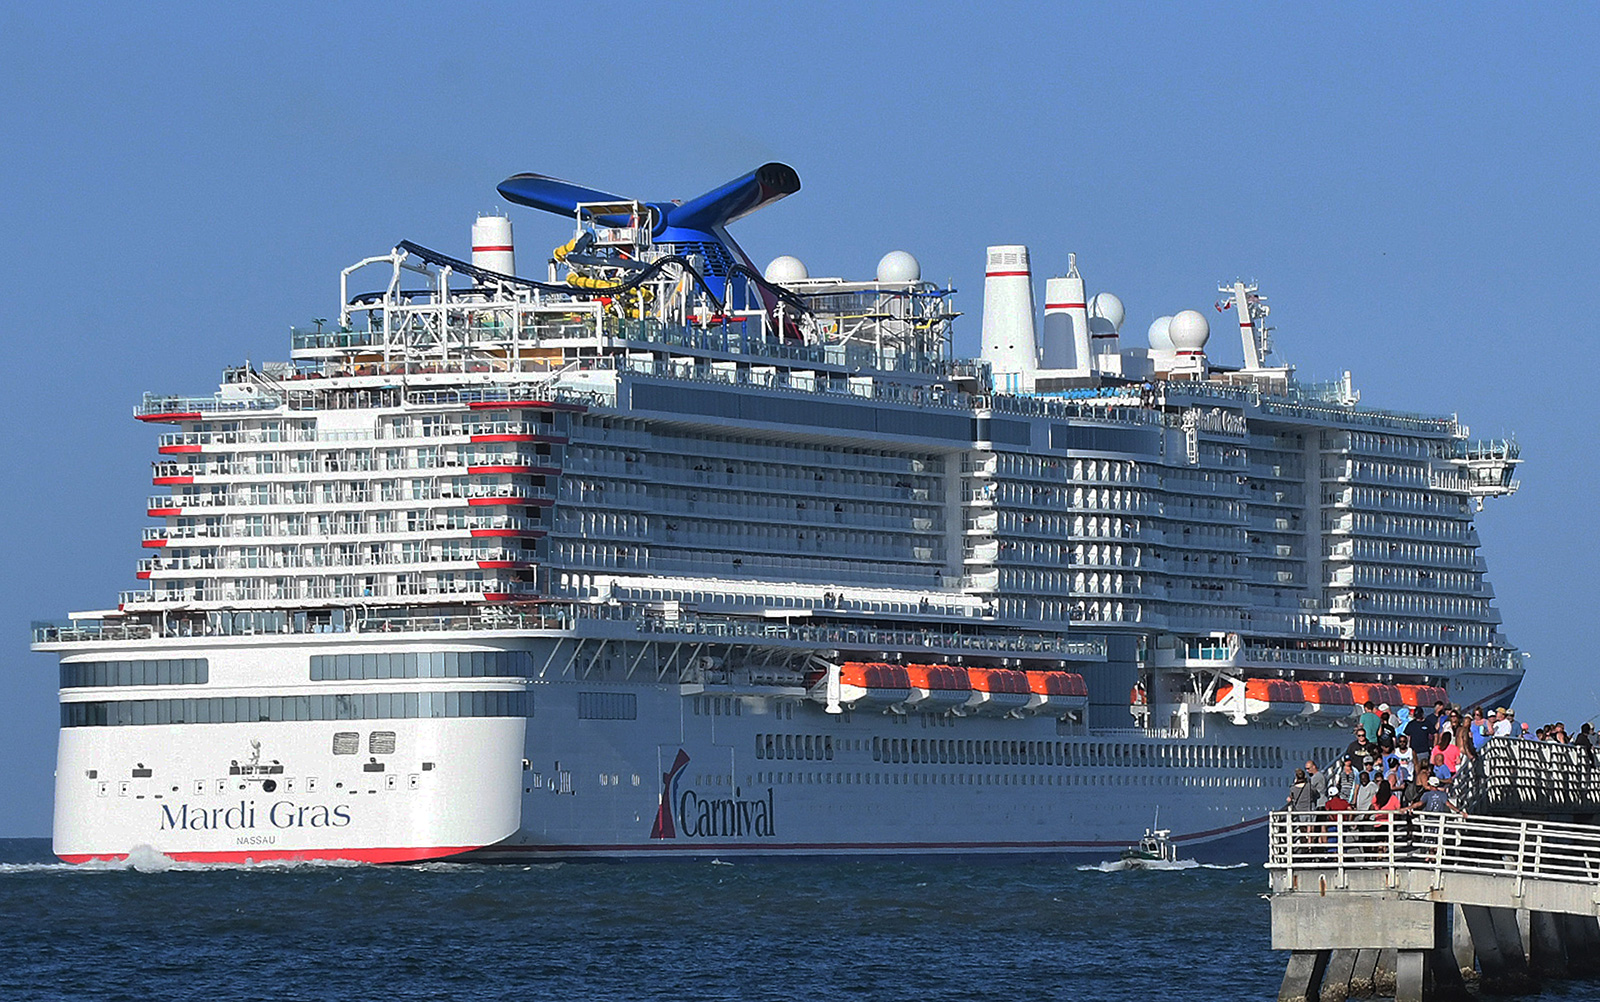 Cruise Ship Mardi Gras Rescued 16 People Stranded At Sea